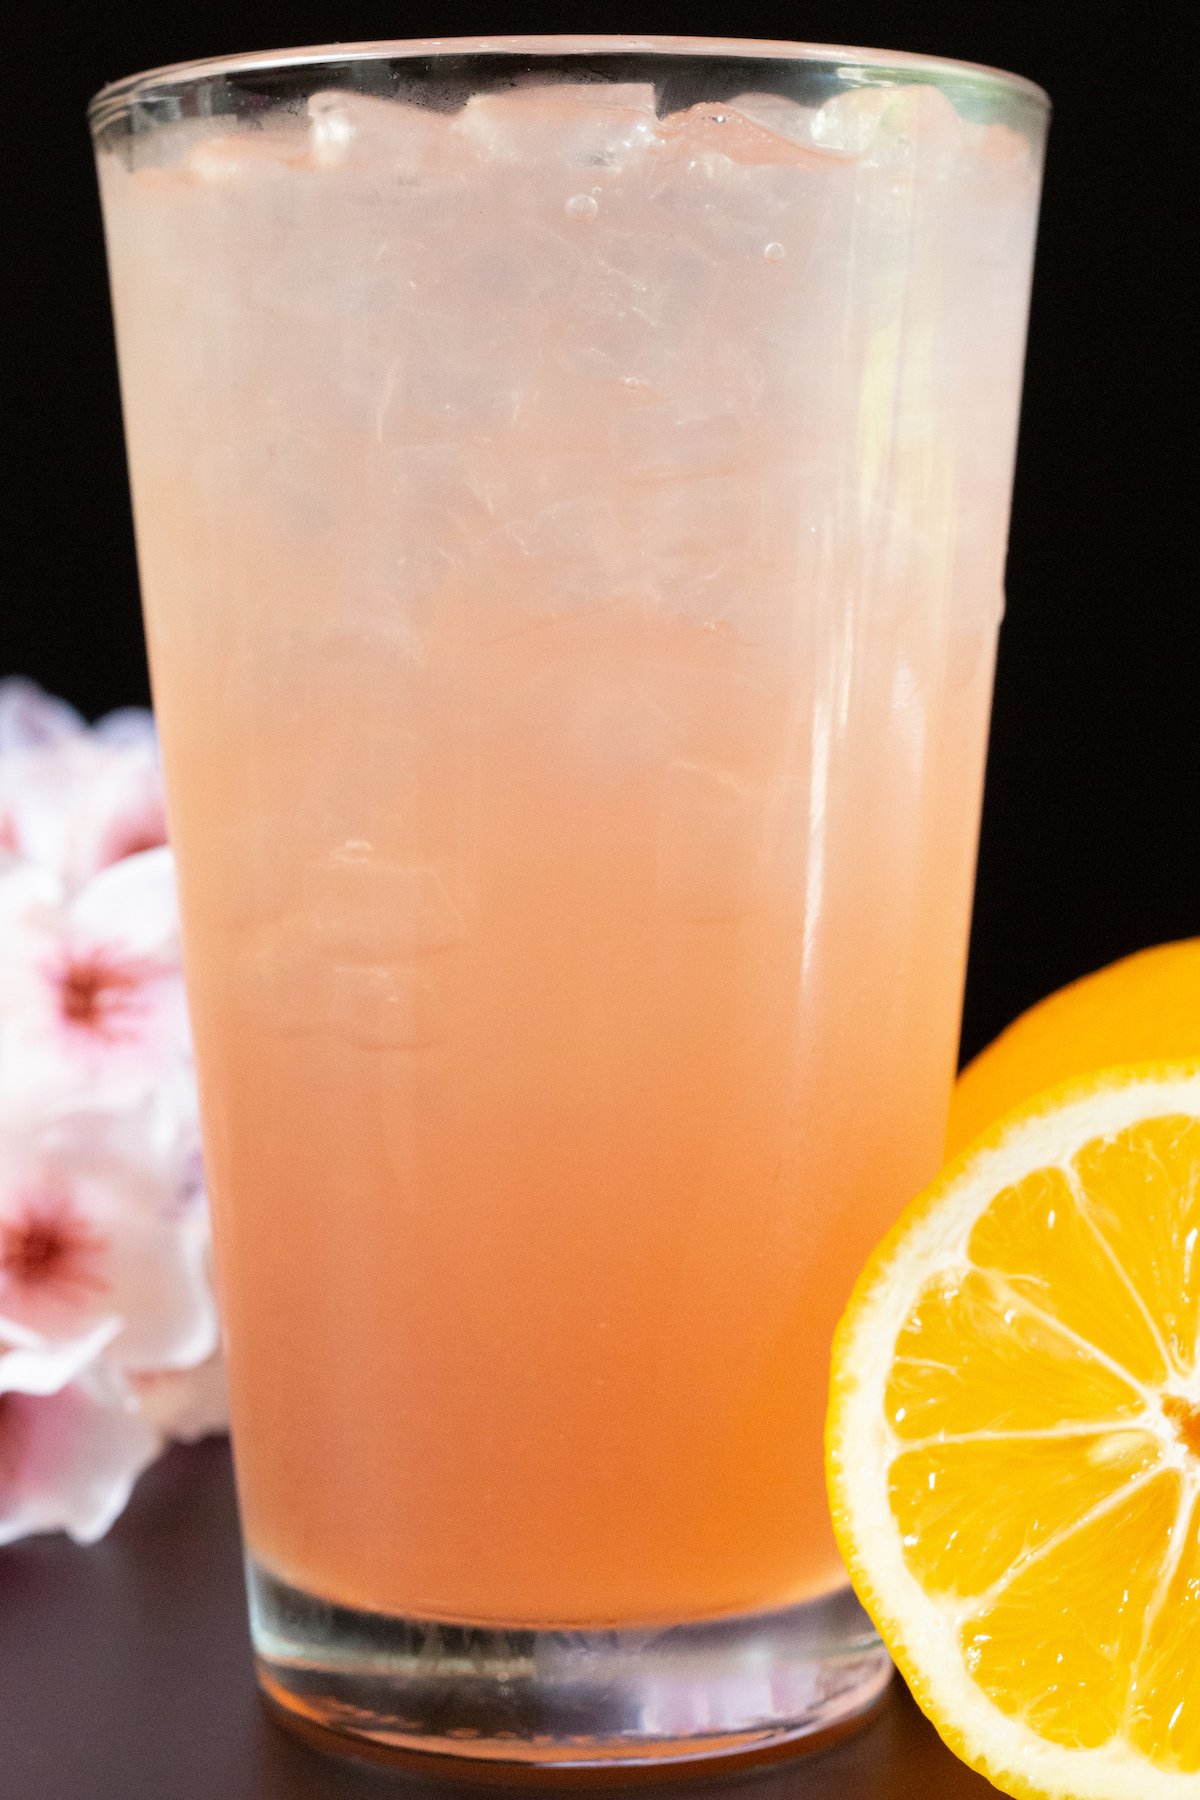 A frosty pint glass is filled with a light pink sakura flavored lemonade. A sliced lemon is in focus on the right, and cherry blossoms out of focus in the background on the left.